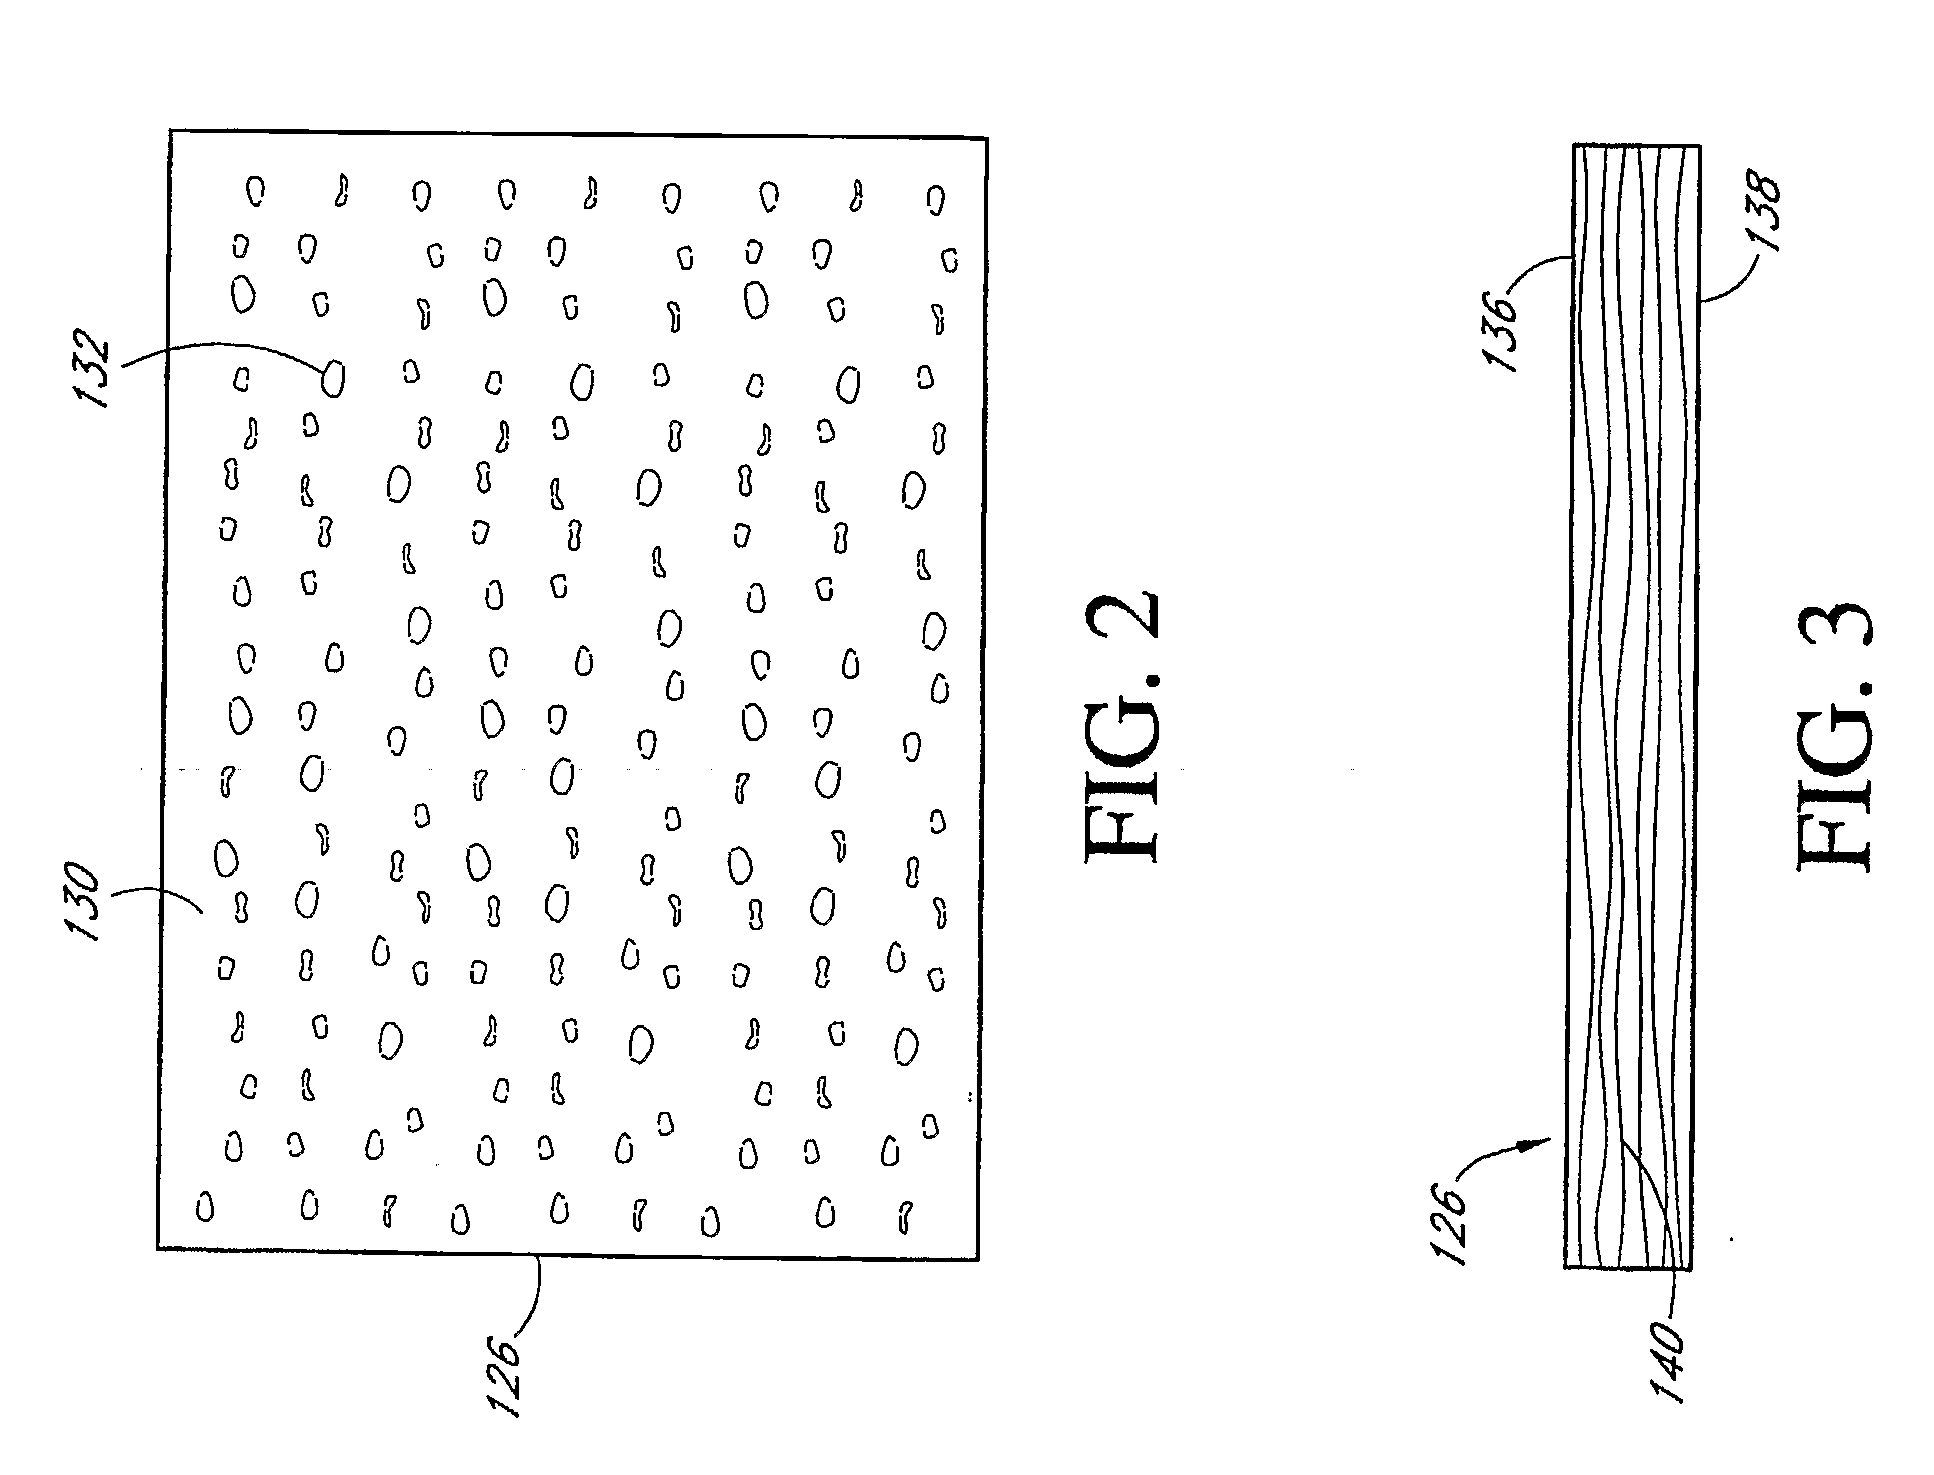 System and Method for Removing Brake Dust and Other Pollutants